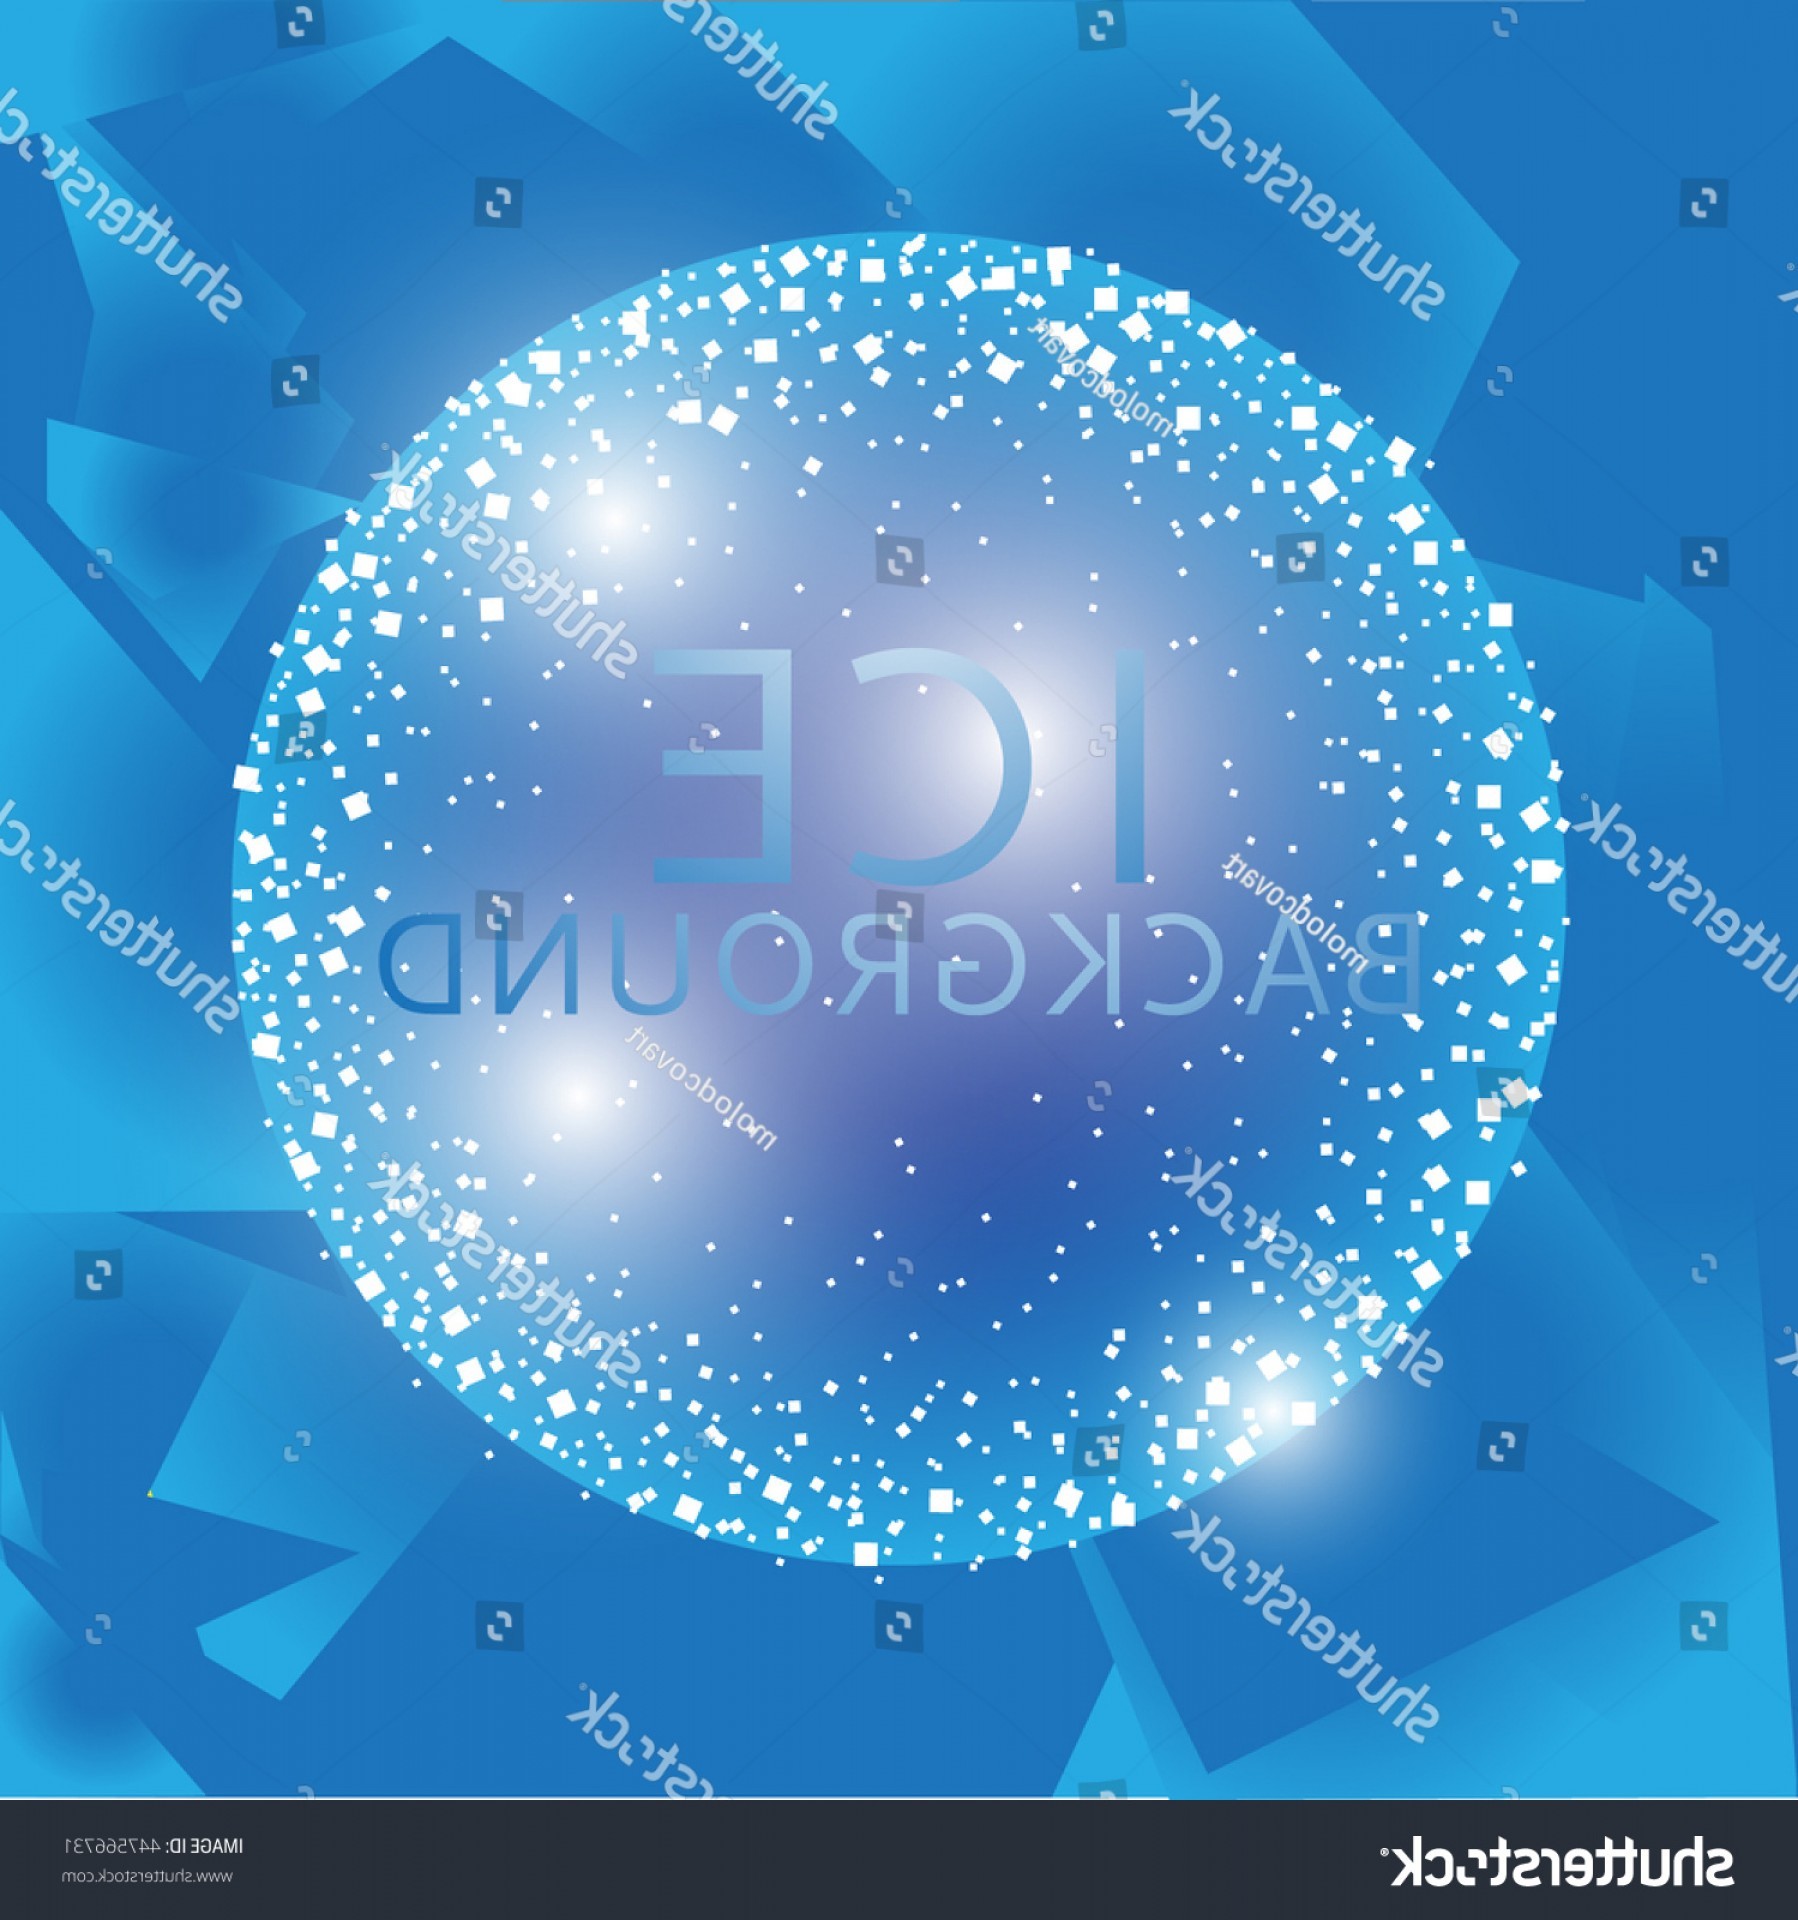 1798x1920 Cool Wallpaper Images Vector: Icy Winter Background Wallpaper Snowball  Themed